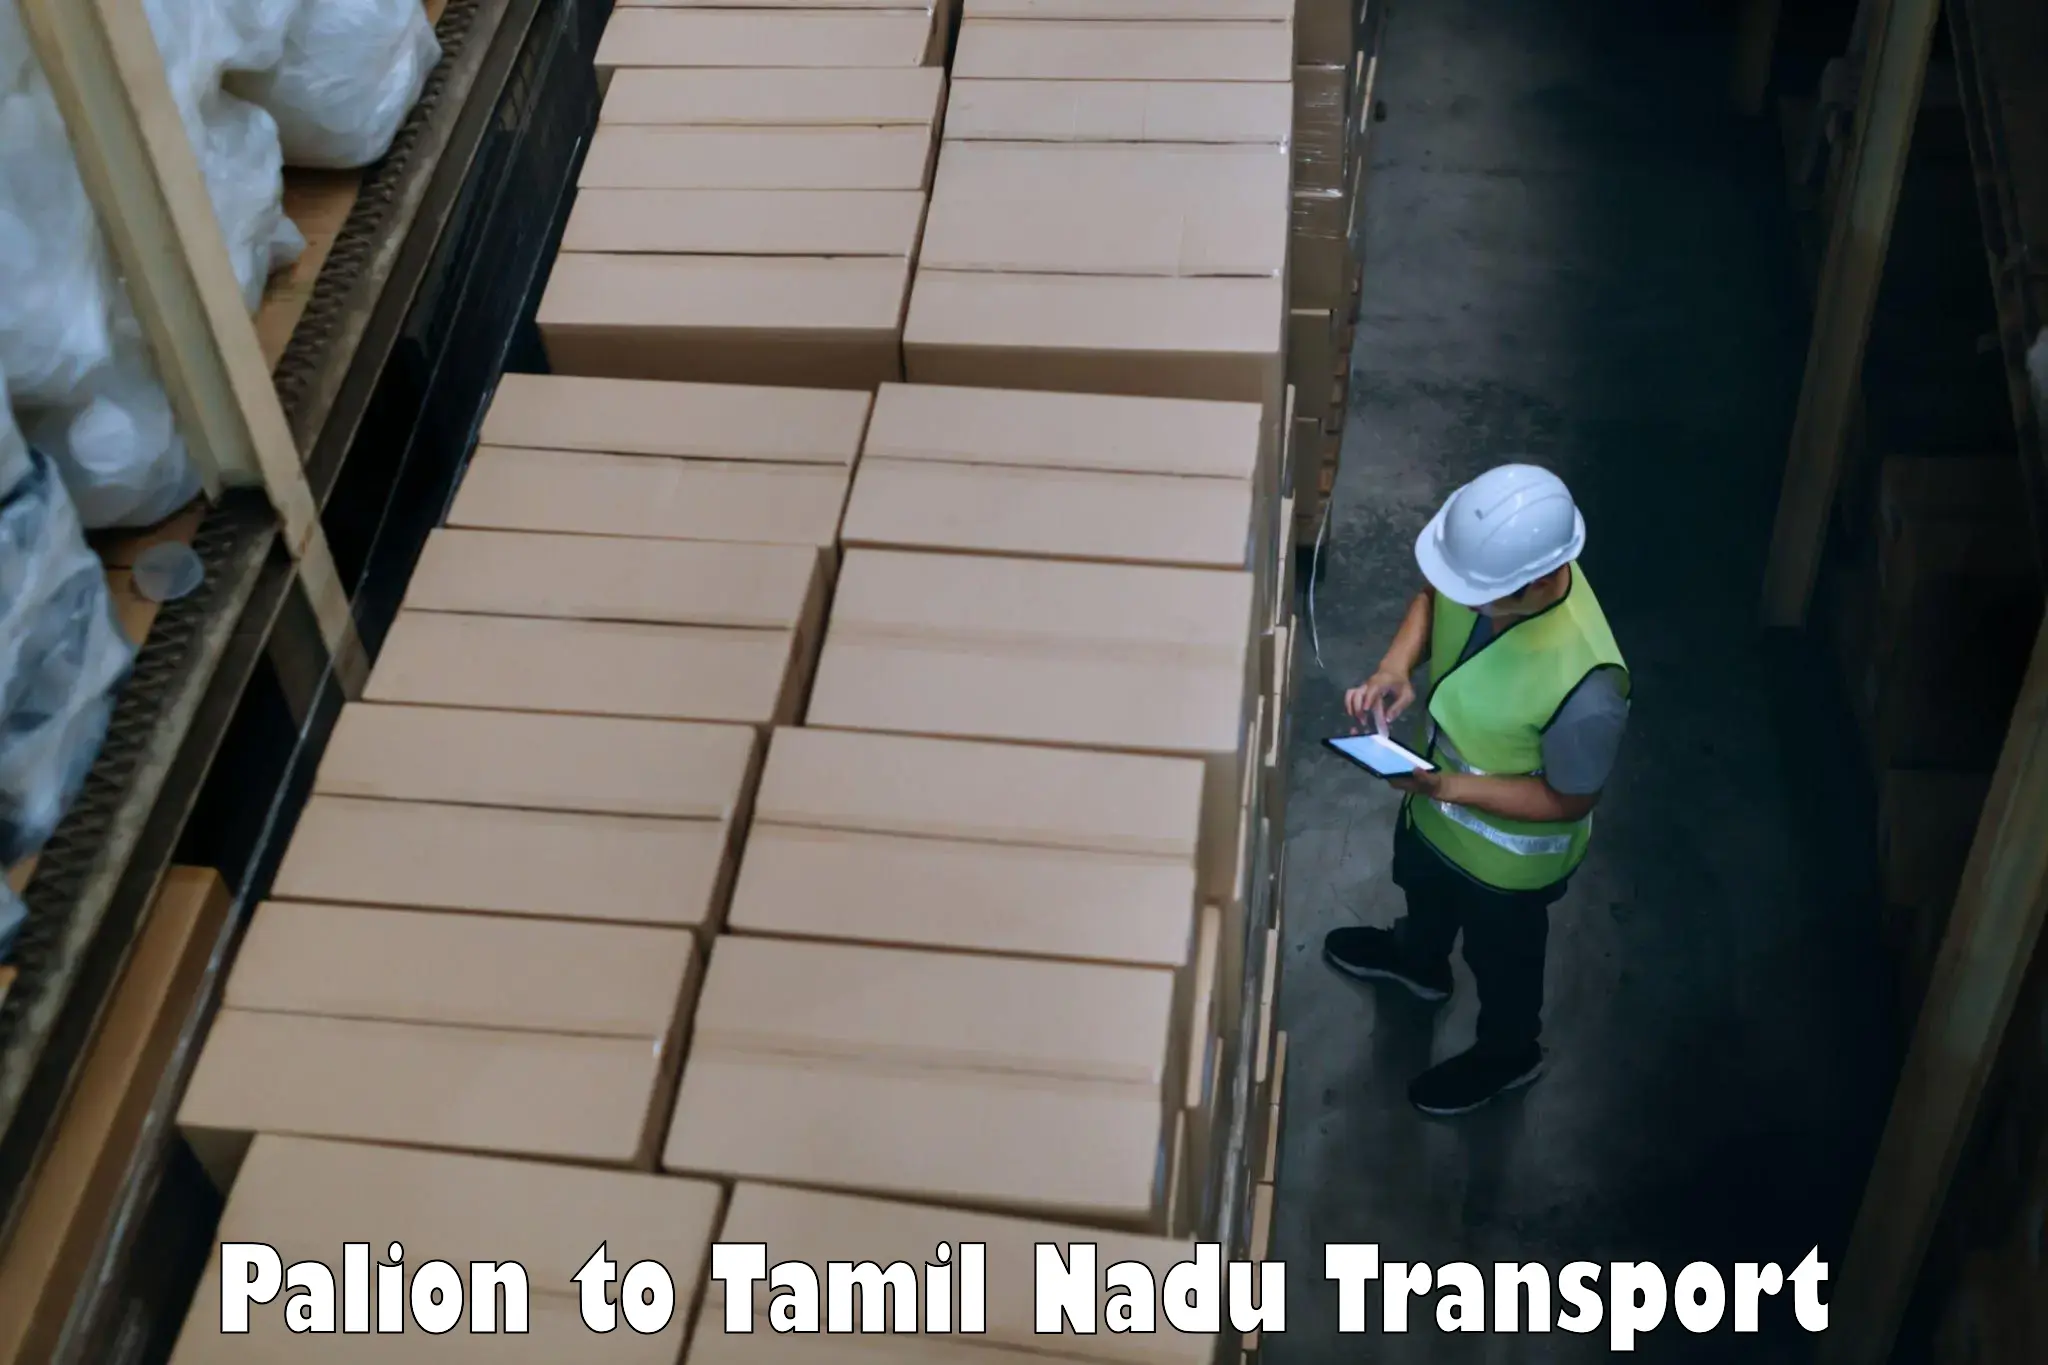 Road transport online services Palion to Erode